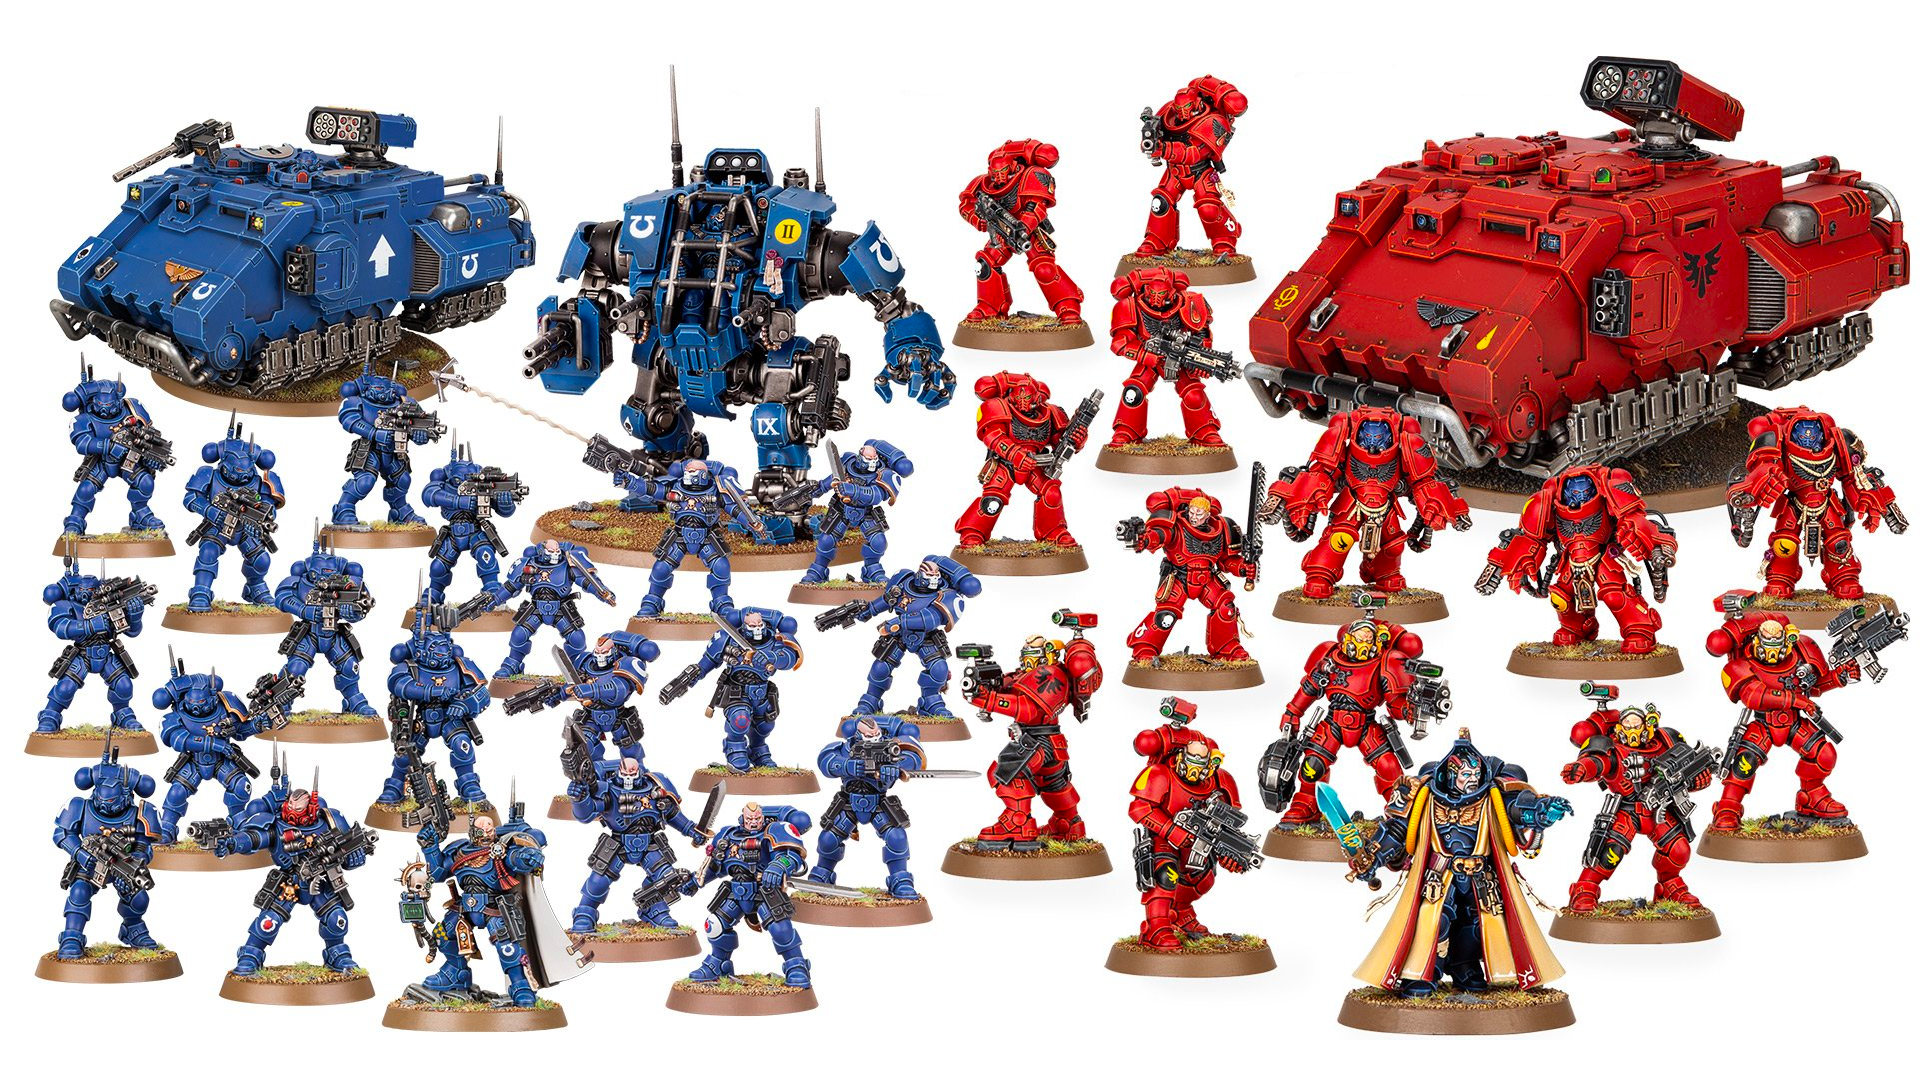 Warhammer 40,000’s Battleforce sets aim to be an entry point for the ...